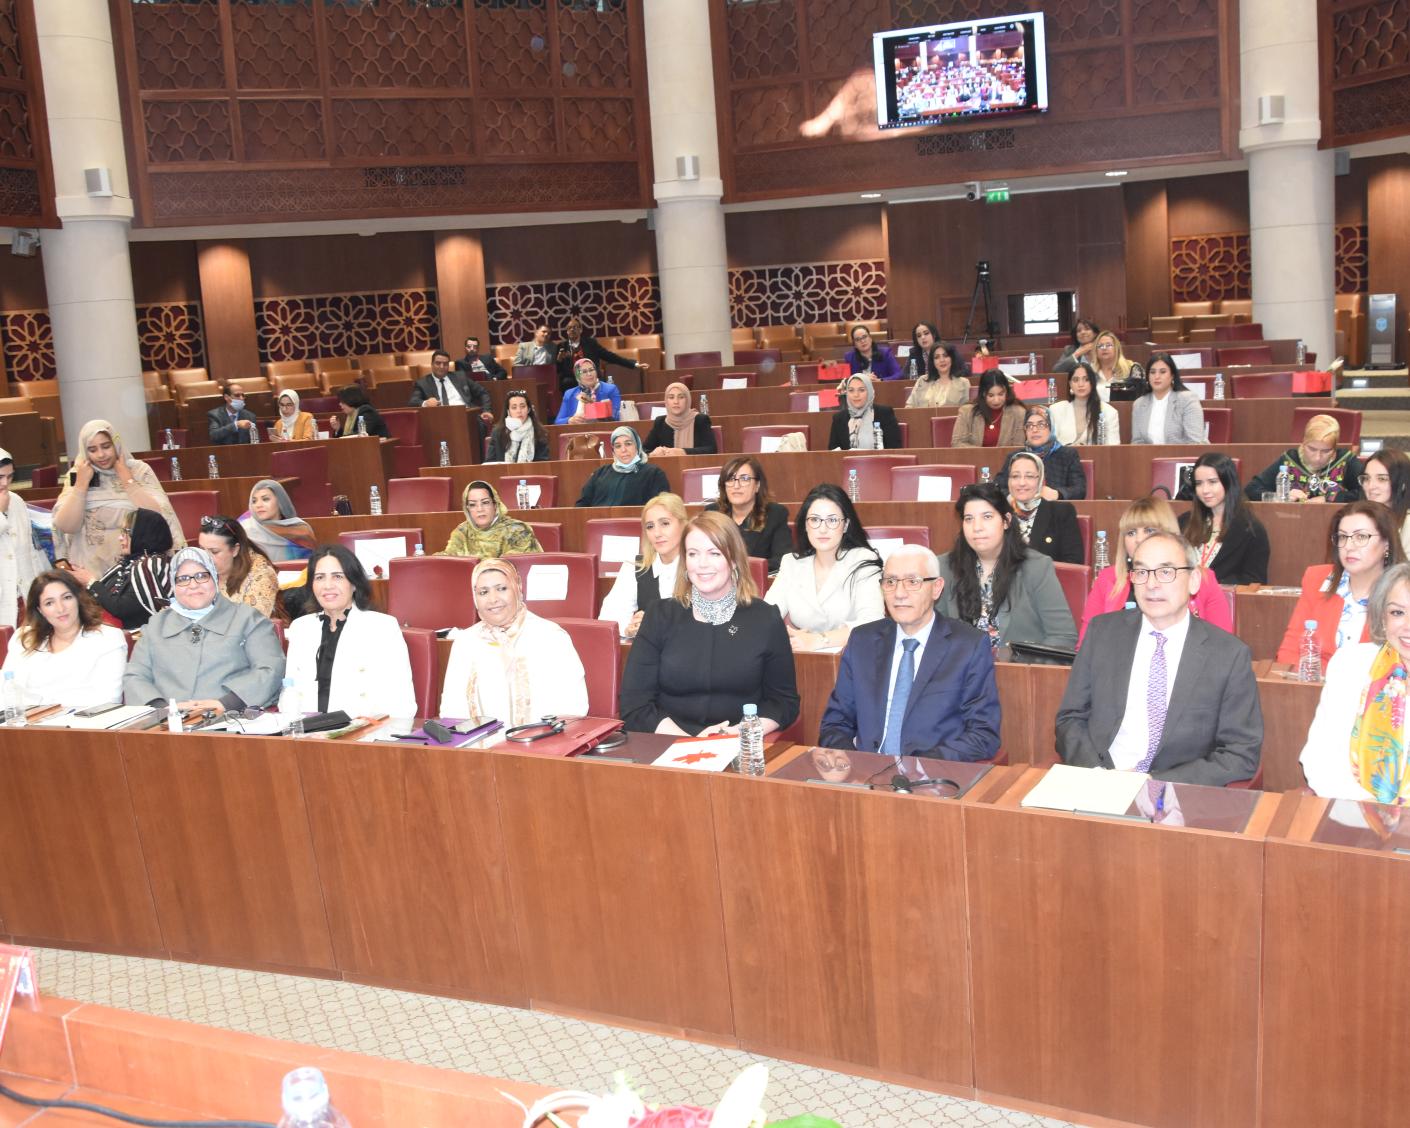 women in the Parliament of Morocco